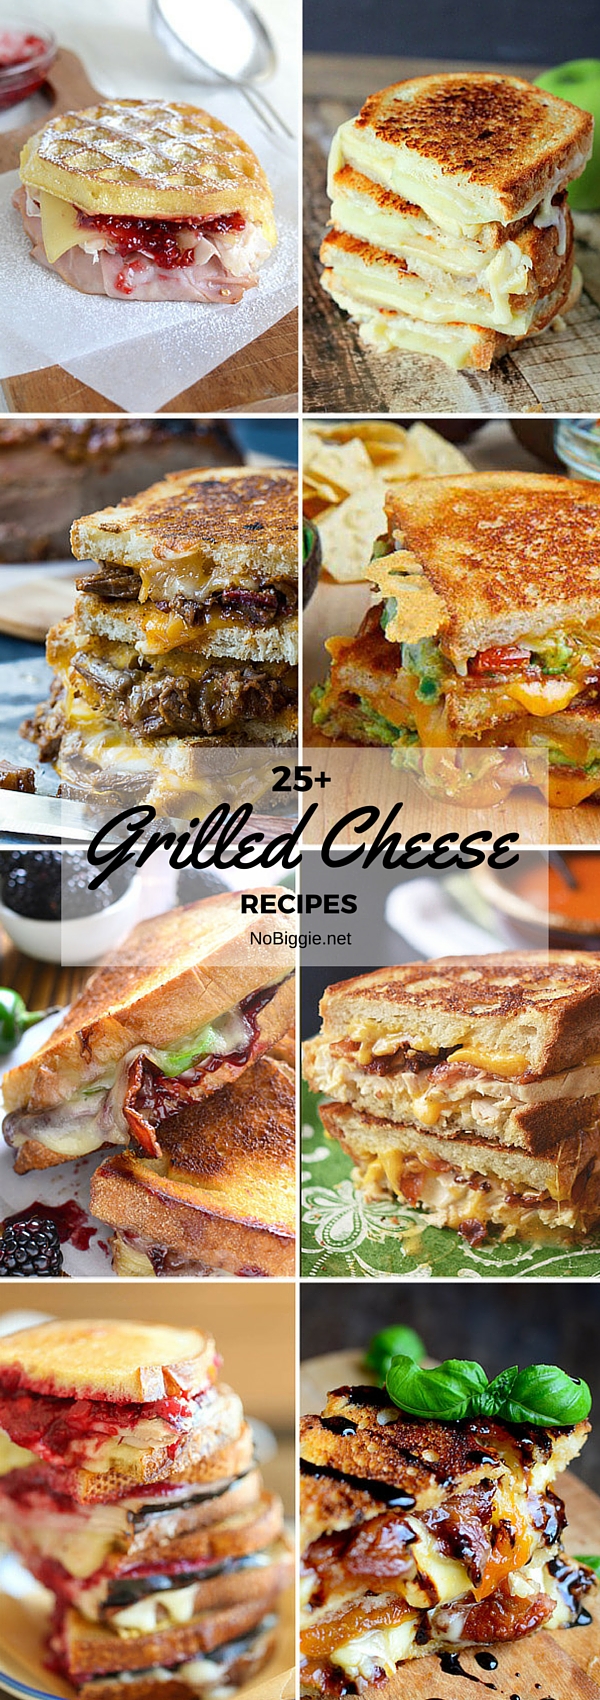 25+ Grilled Cheese Recipes | NoBiggie.net